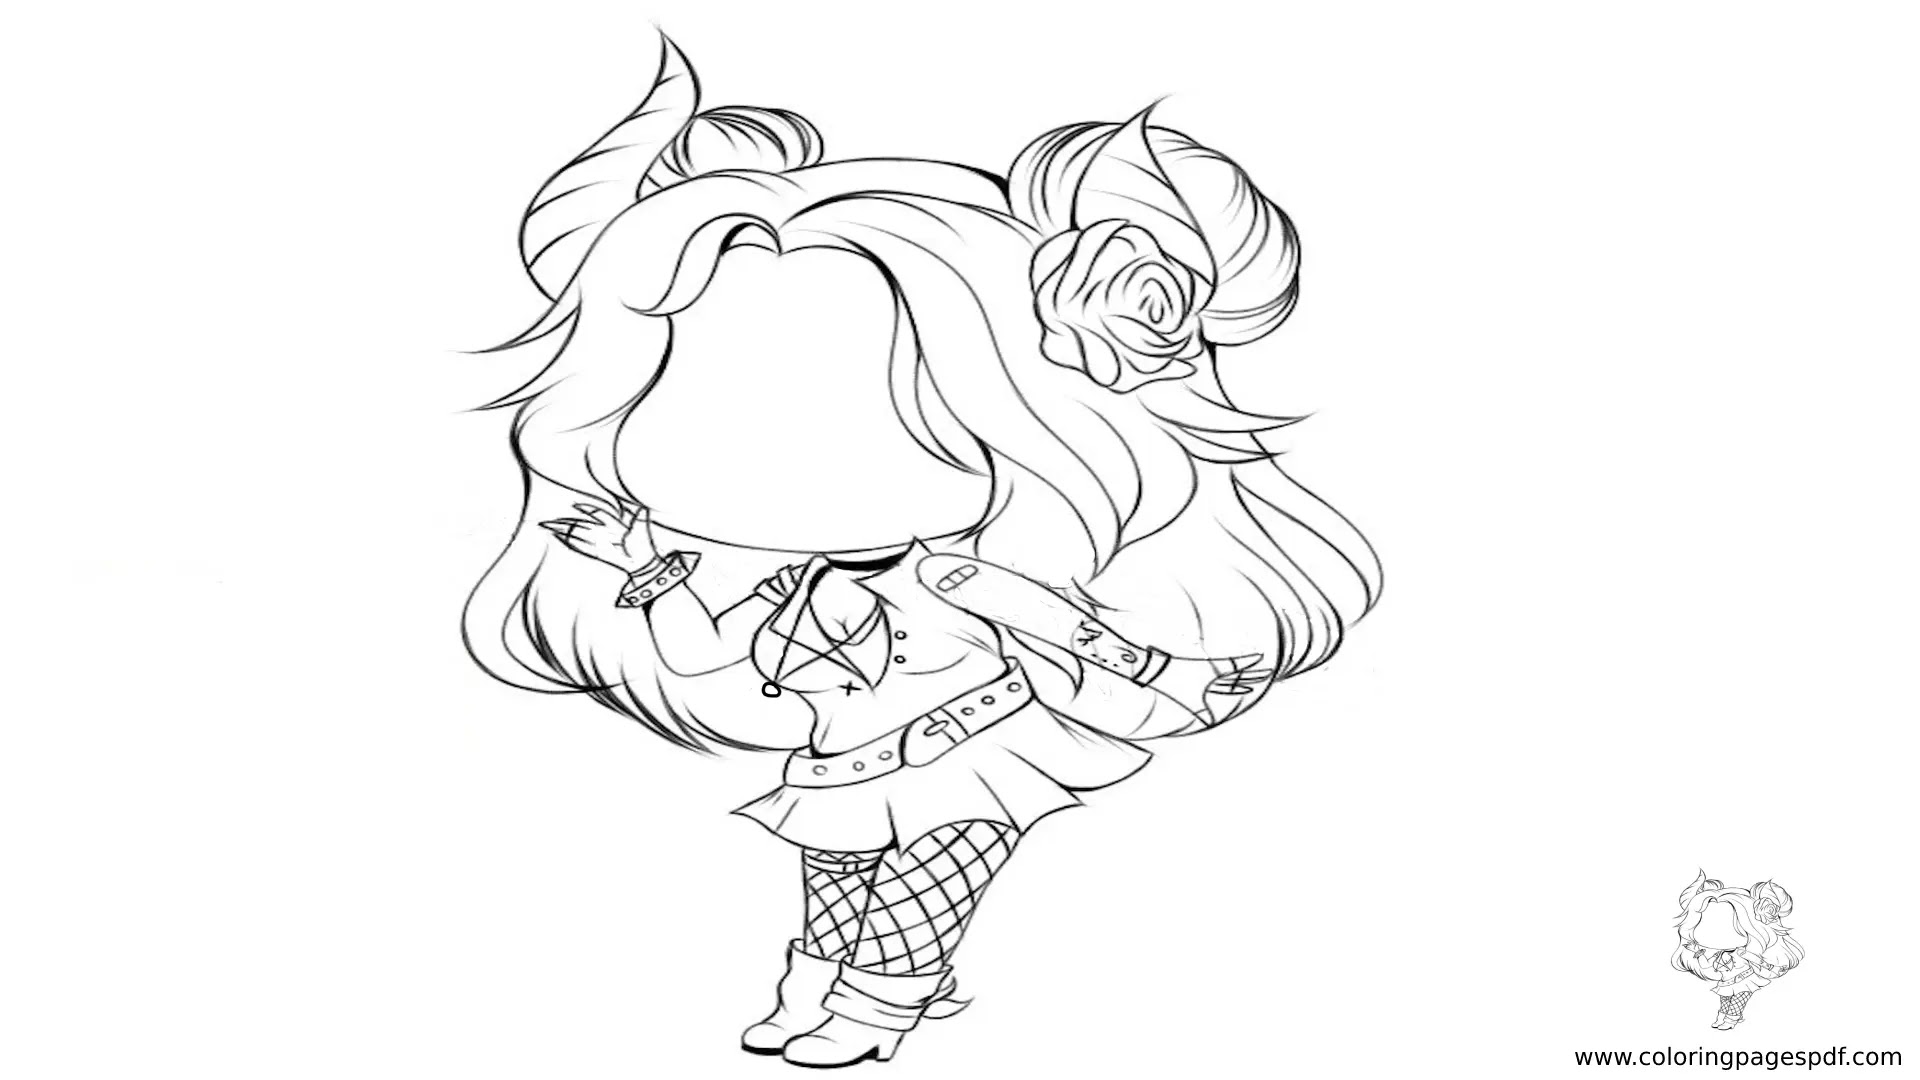 Coloring Pages Of A Goth Female Gacha Life Character